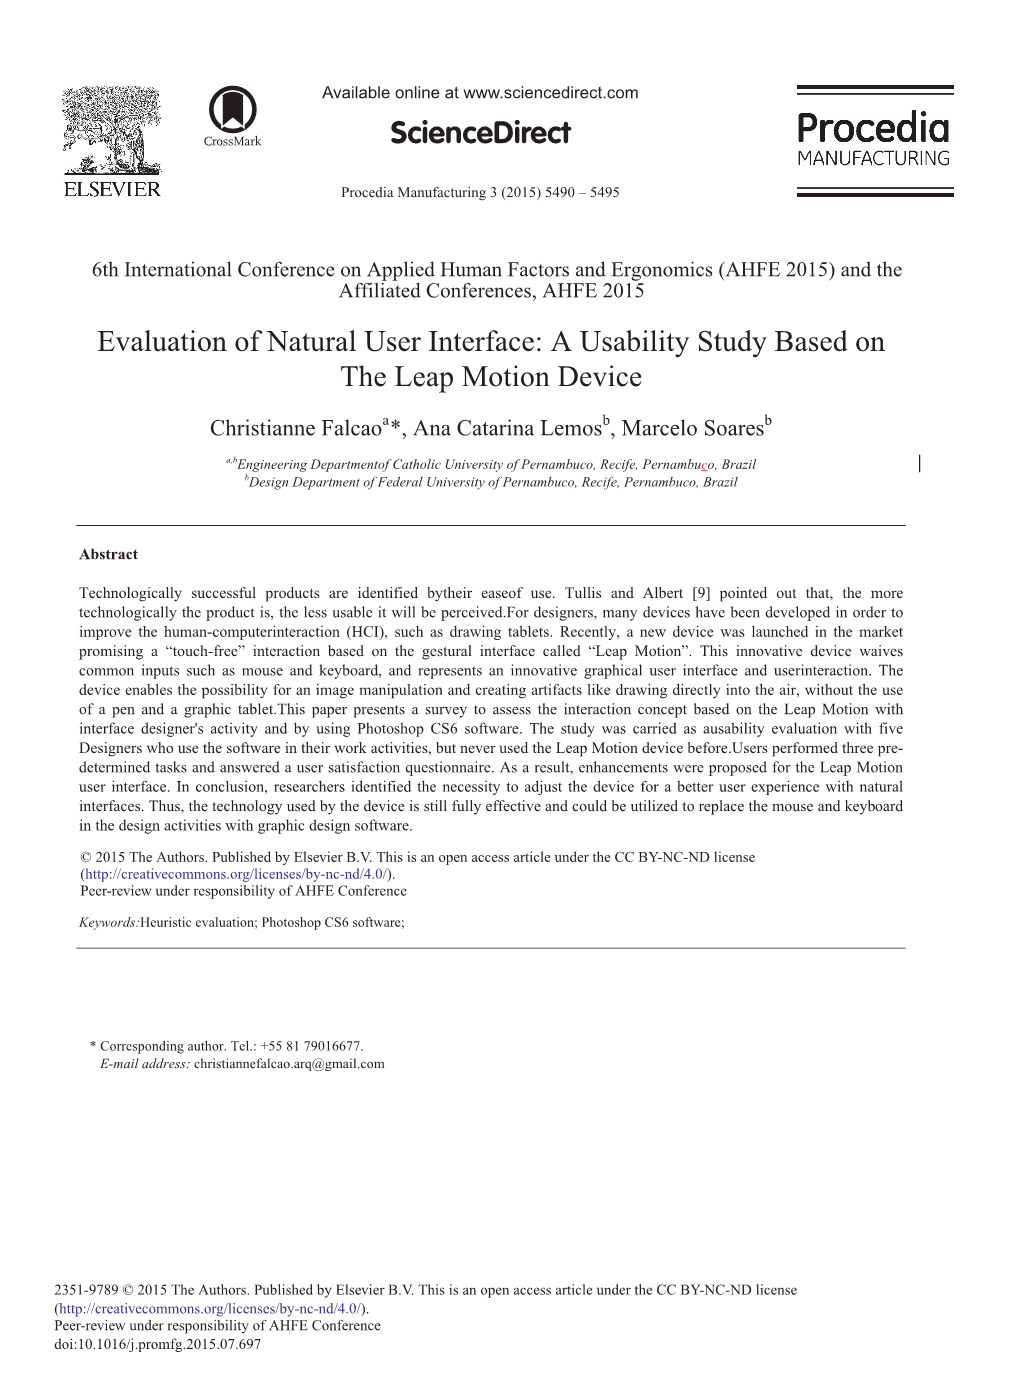 Evaluation of Natural User Interface: a Usability Study Based on the Leap Motion Device